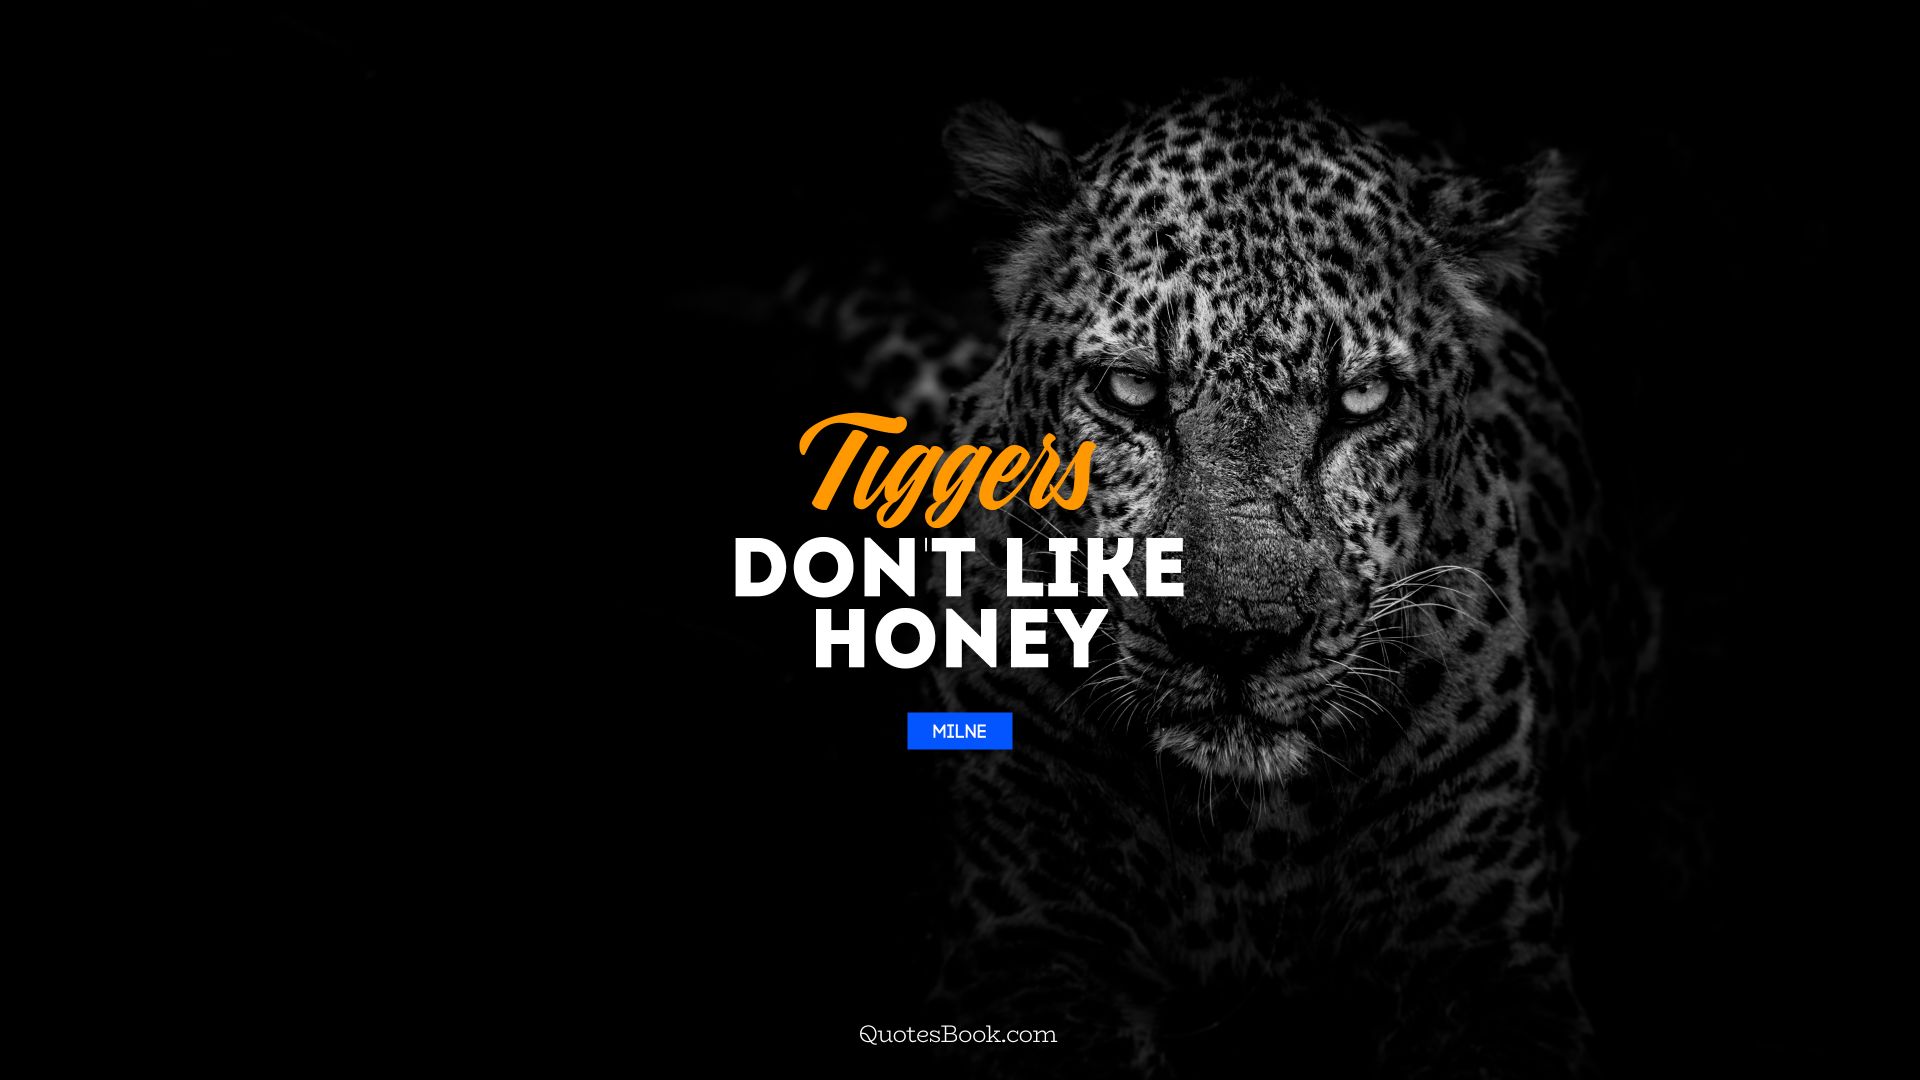 Tiggers don't like honey. - Quote by Milne